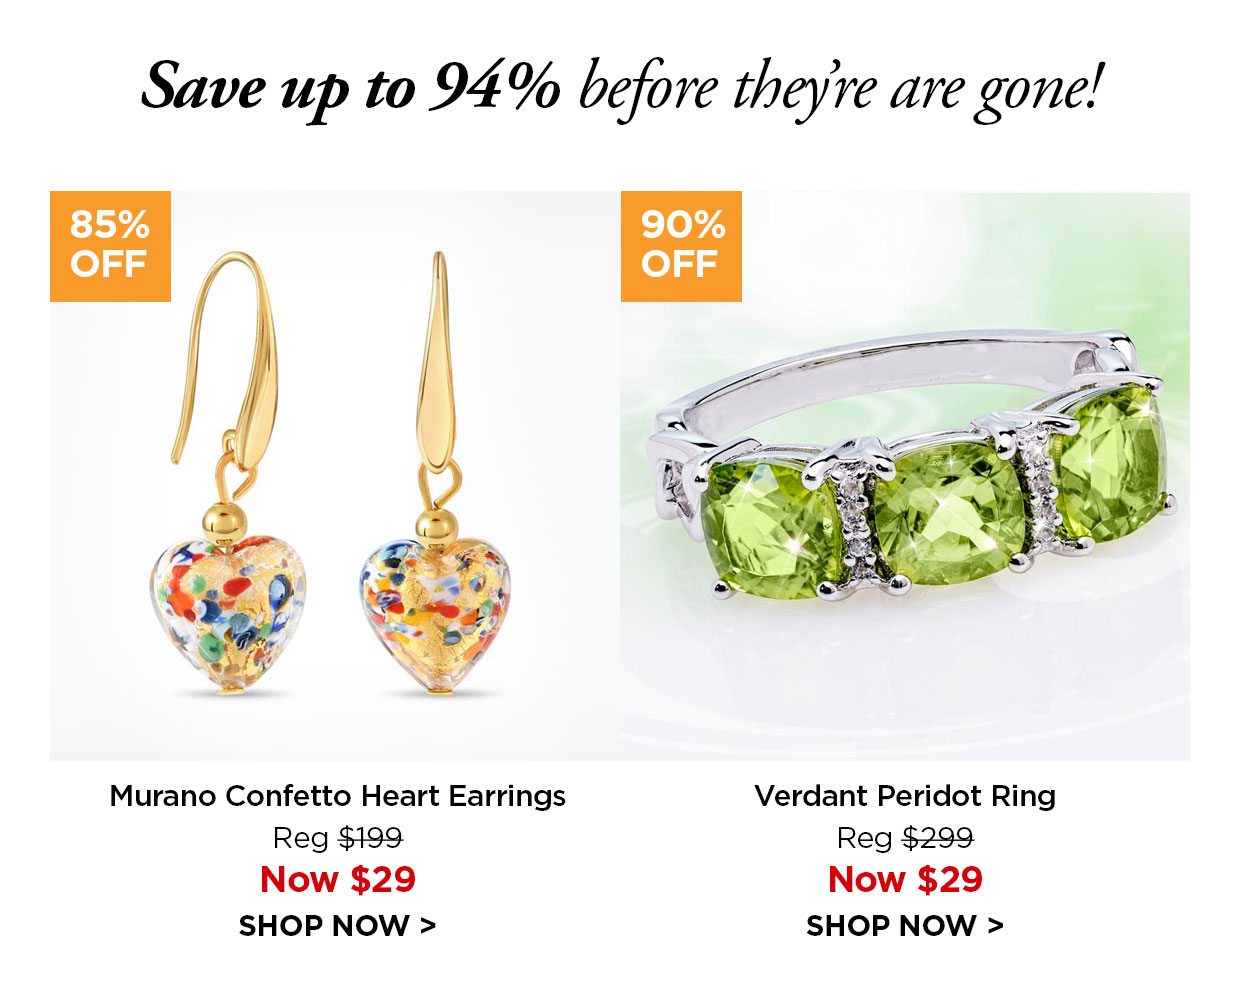 Save up to 94% off before this offer is gone! 85% off. Confetti Earrings Reg $199, Now $29. 90% off. Verdant Peridot Ring Reg $299, Now $29.